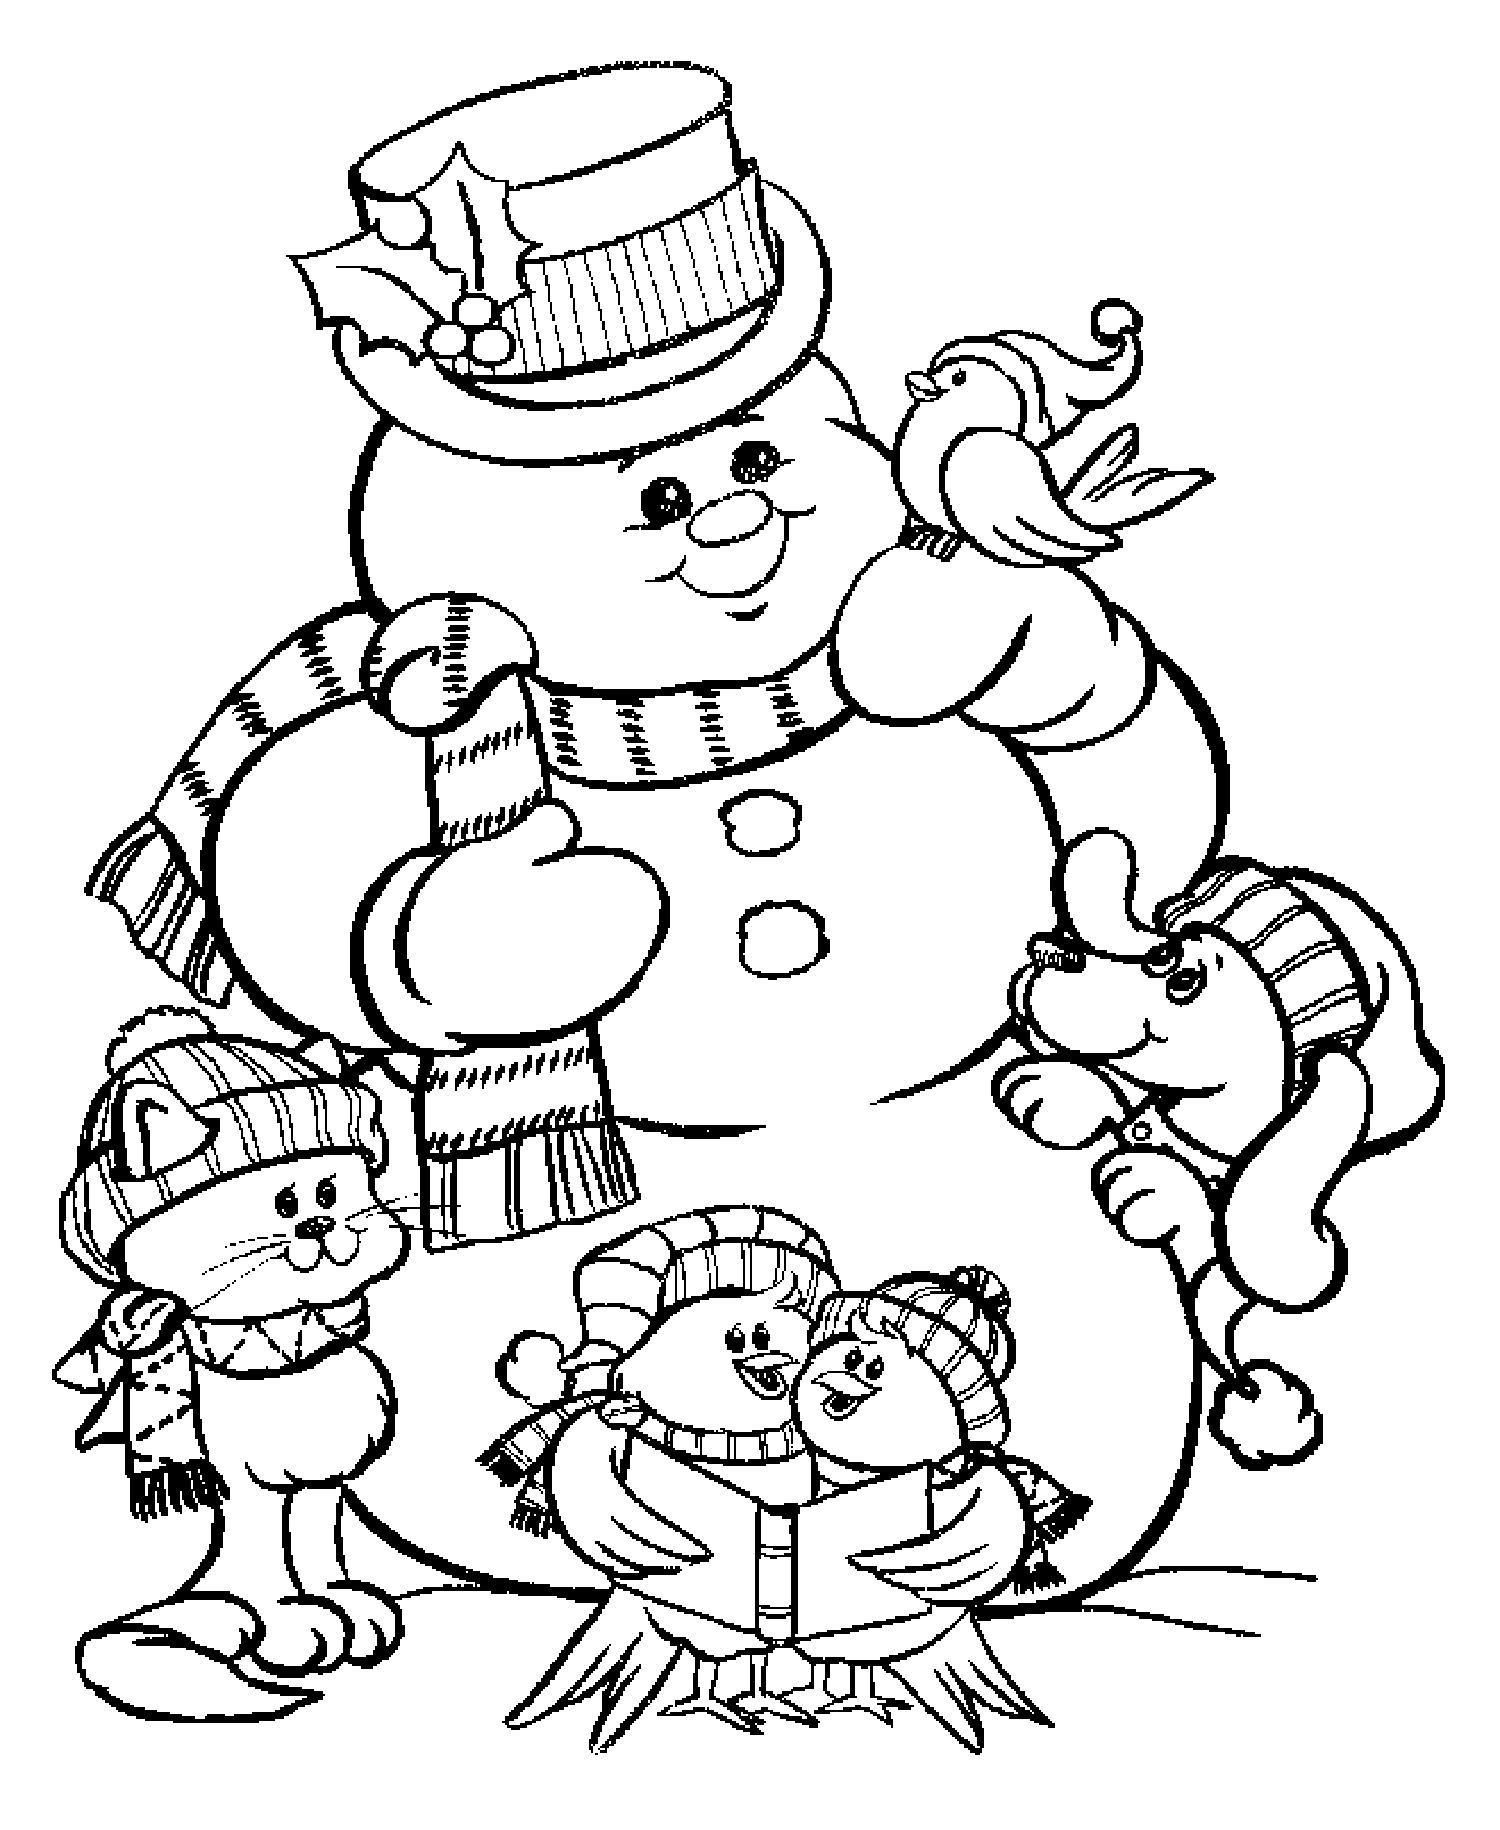 Coloring Pages For Kids Christmas, Coloring Pages Christmas Coloring